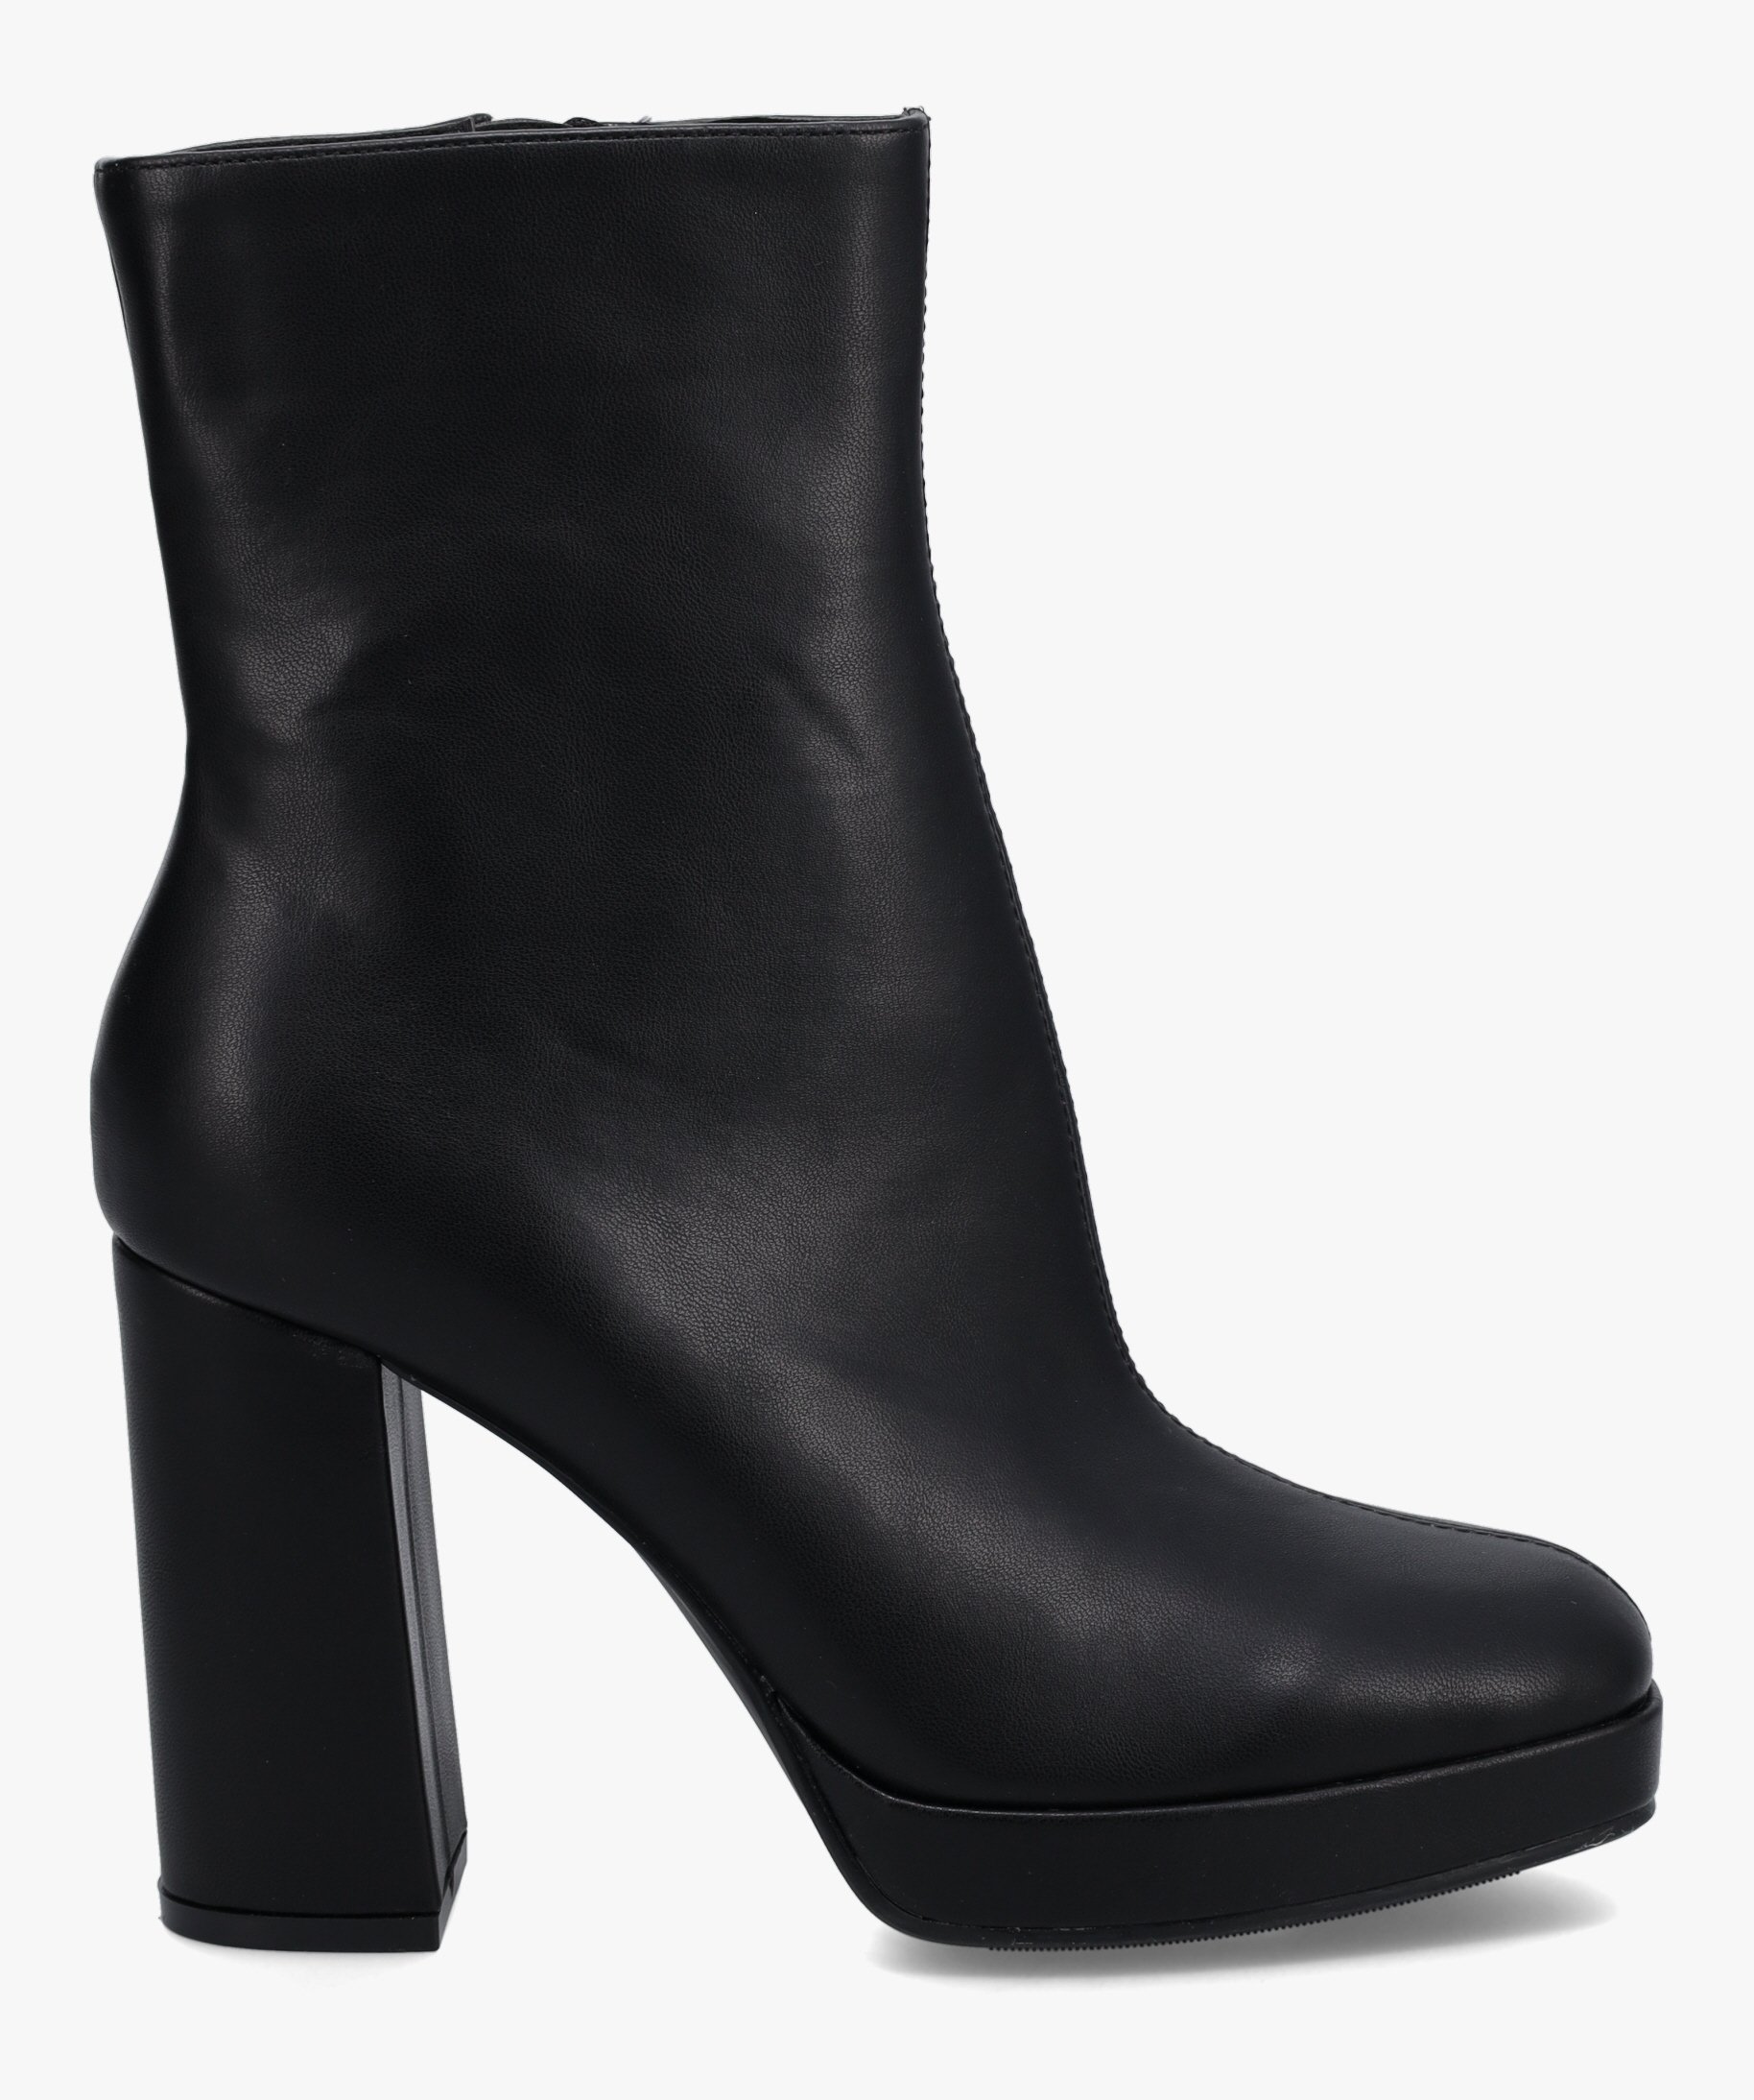 Achat chaussures Claudia Ghizzani Femme Boots, vente Claudia Ghizzani 2  239101 Black - Semelle cloutee - Boots